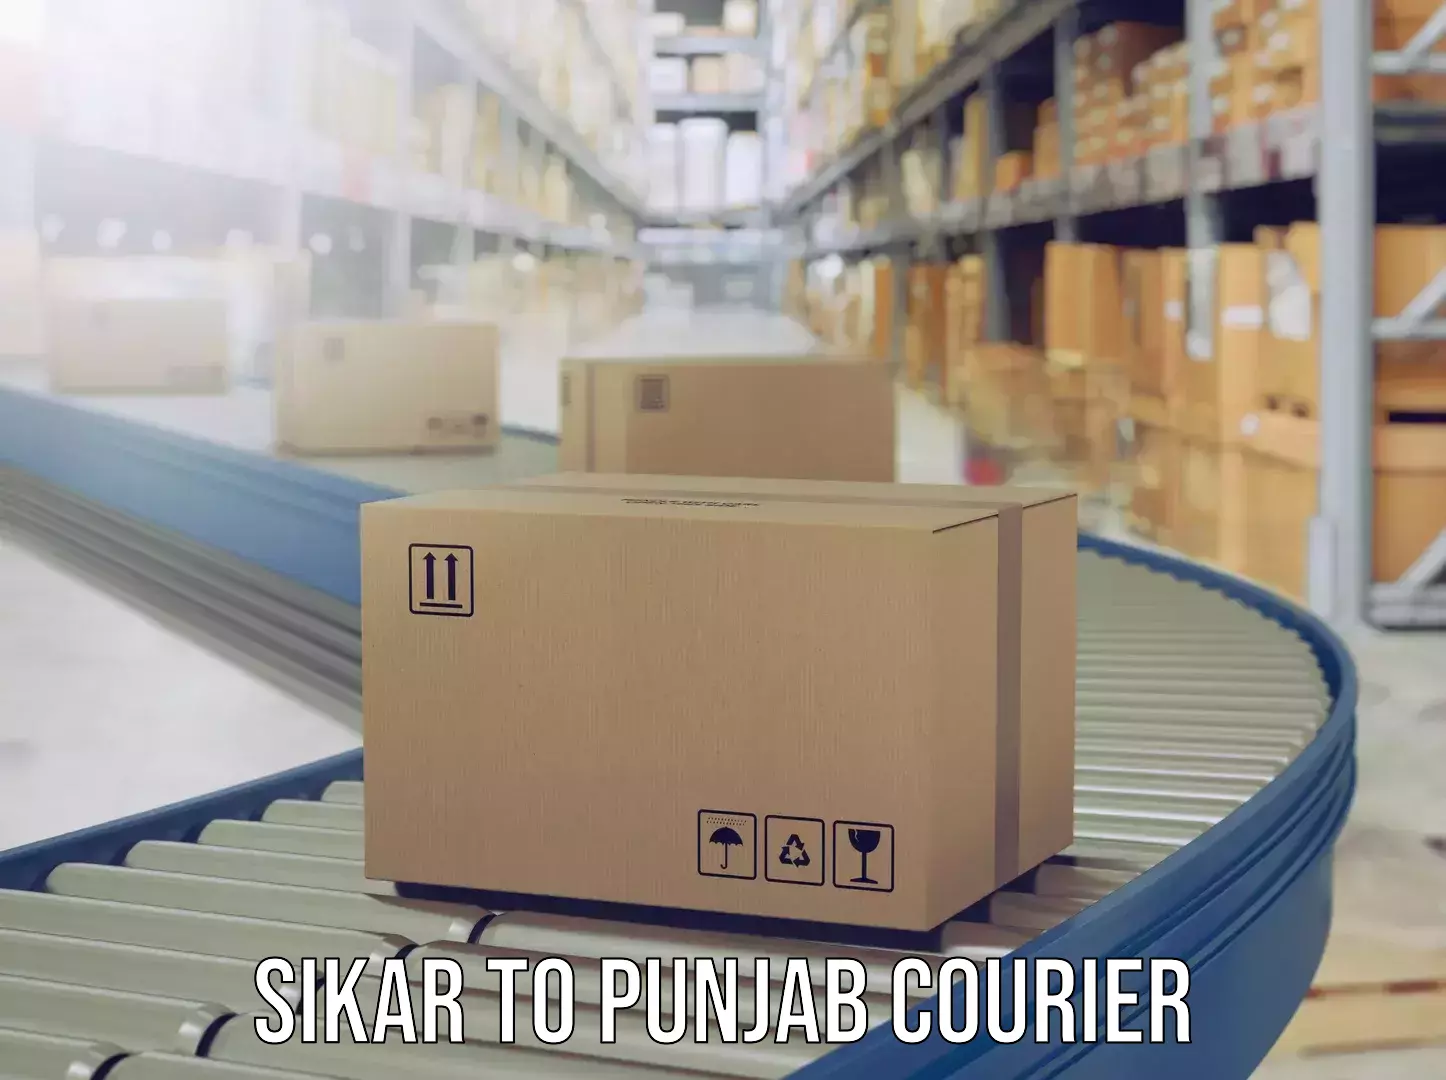 Instant baggage transport quote Sikar to Mohali